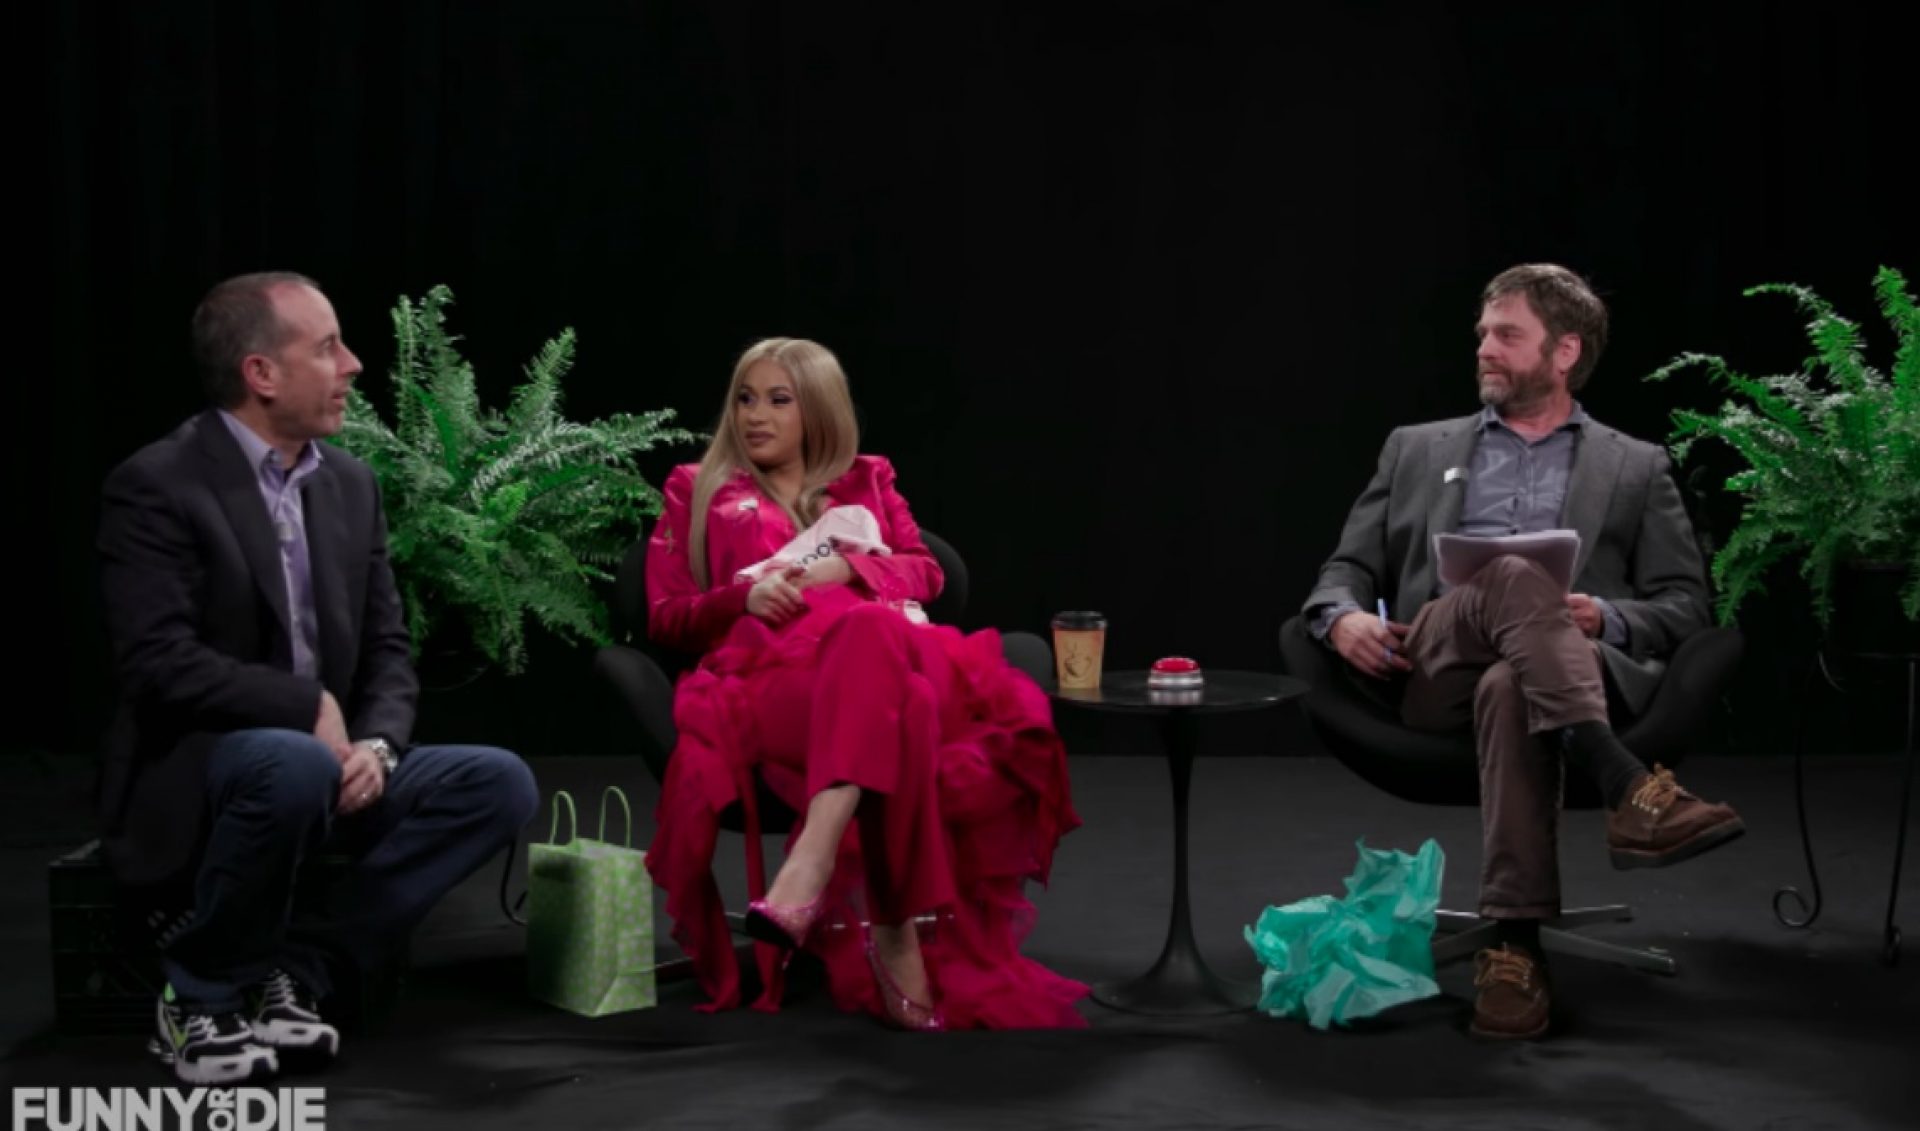 Jerry Seinfeld, Cardi B Guest Star As ‘Between Two Ferns With Zach Galifianakis’ Returns